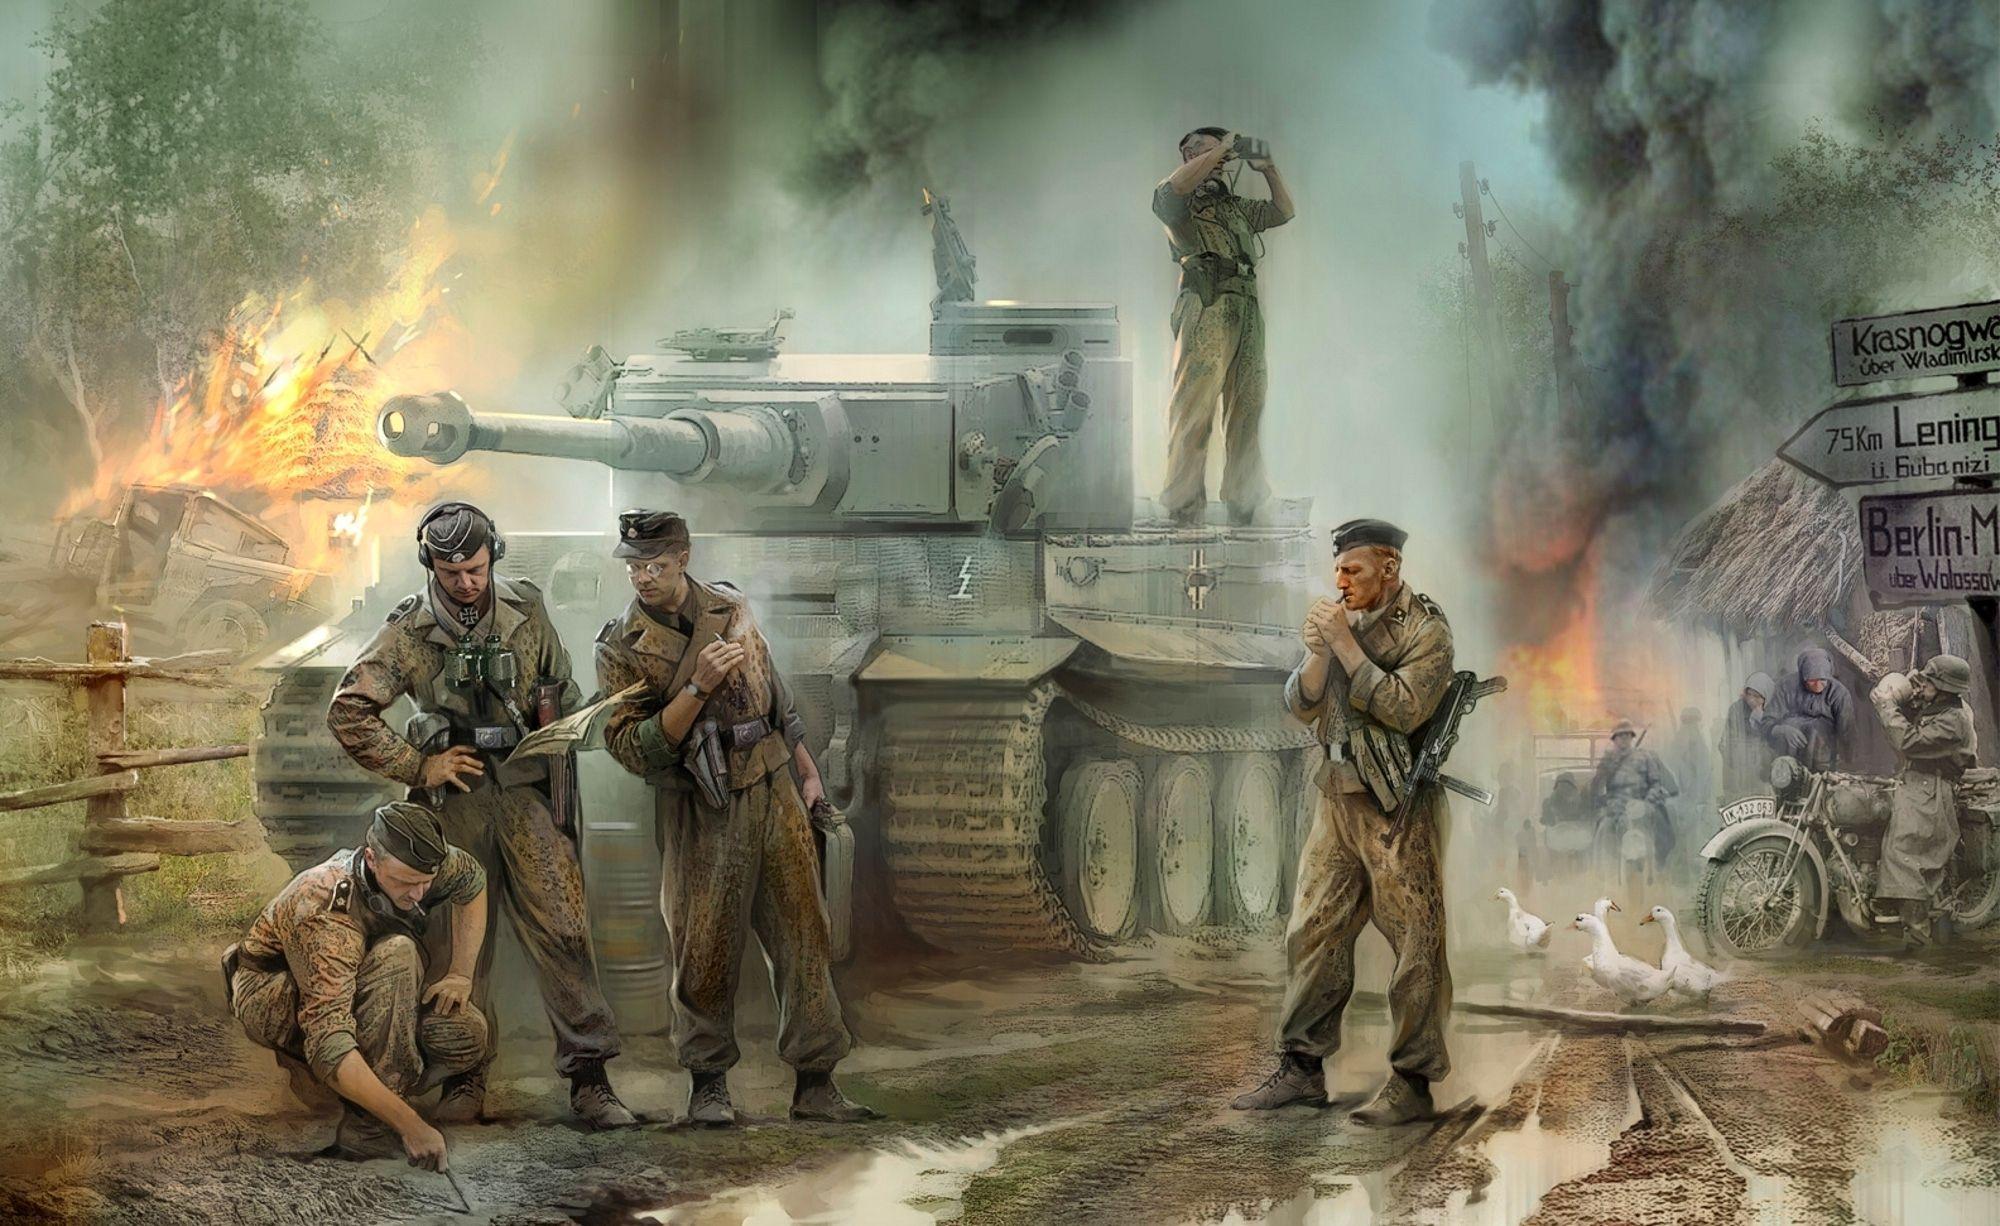 Wallpaper Tanks Soldiers Tiger Army Image Download